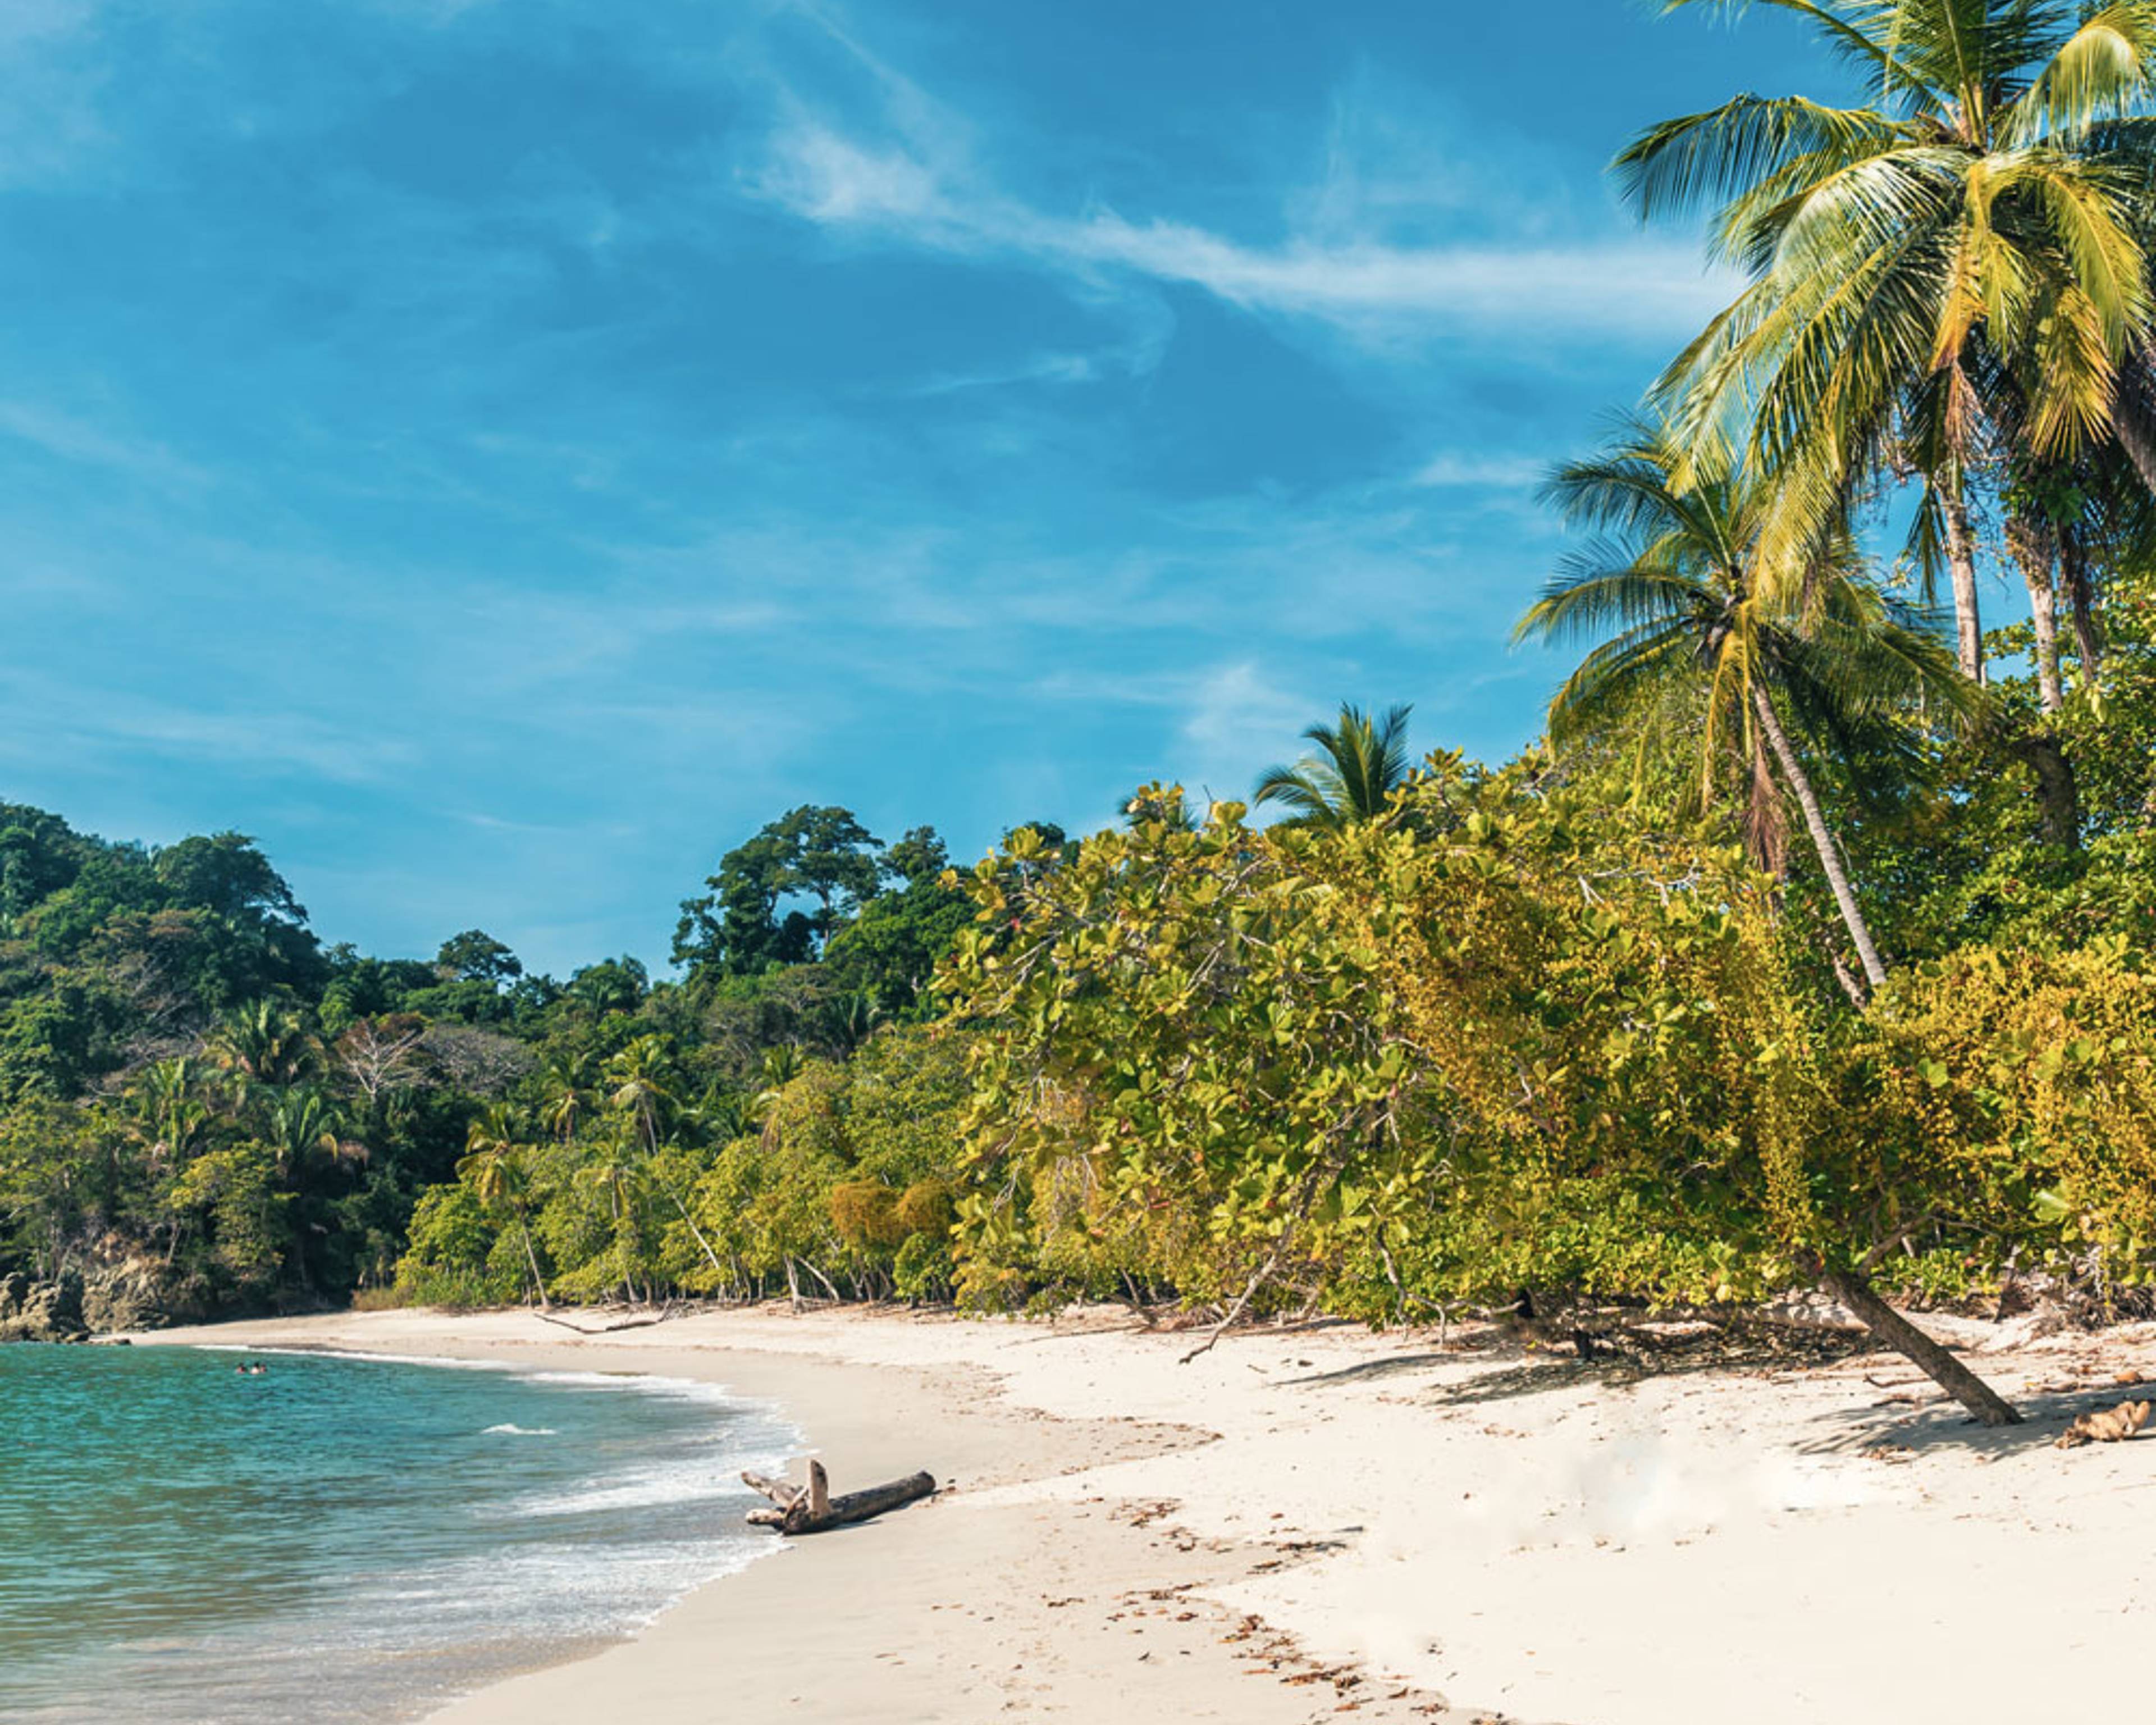 Design your perfect trip to Costa Rica's beaches with a local expert